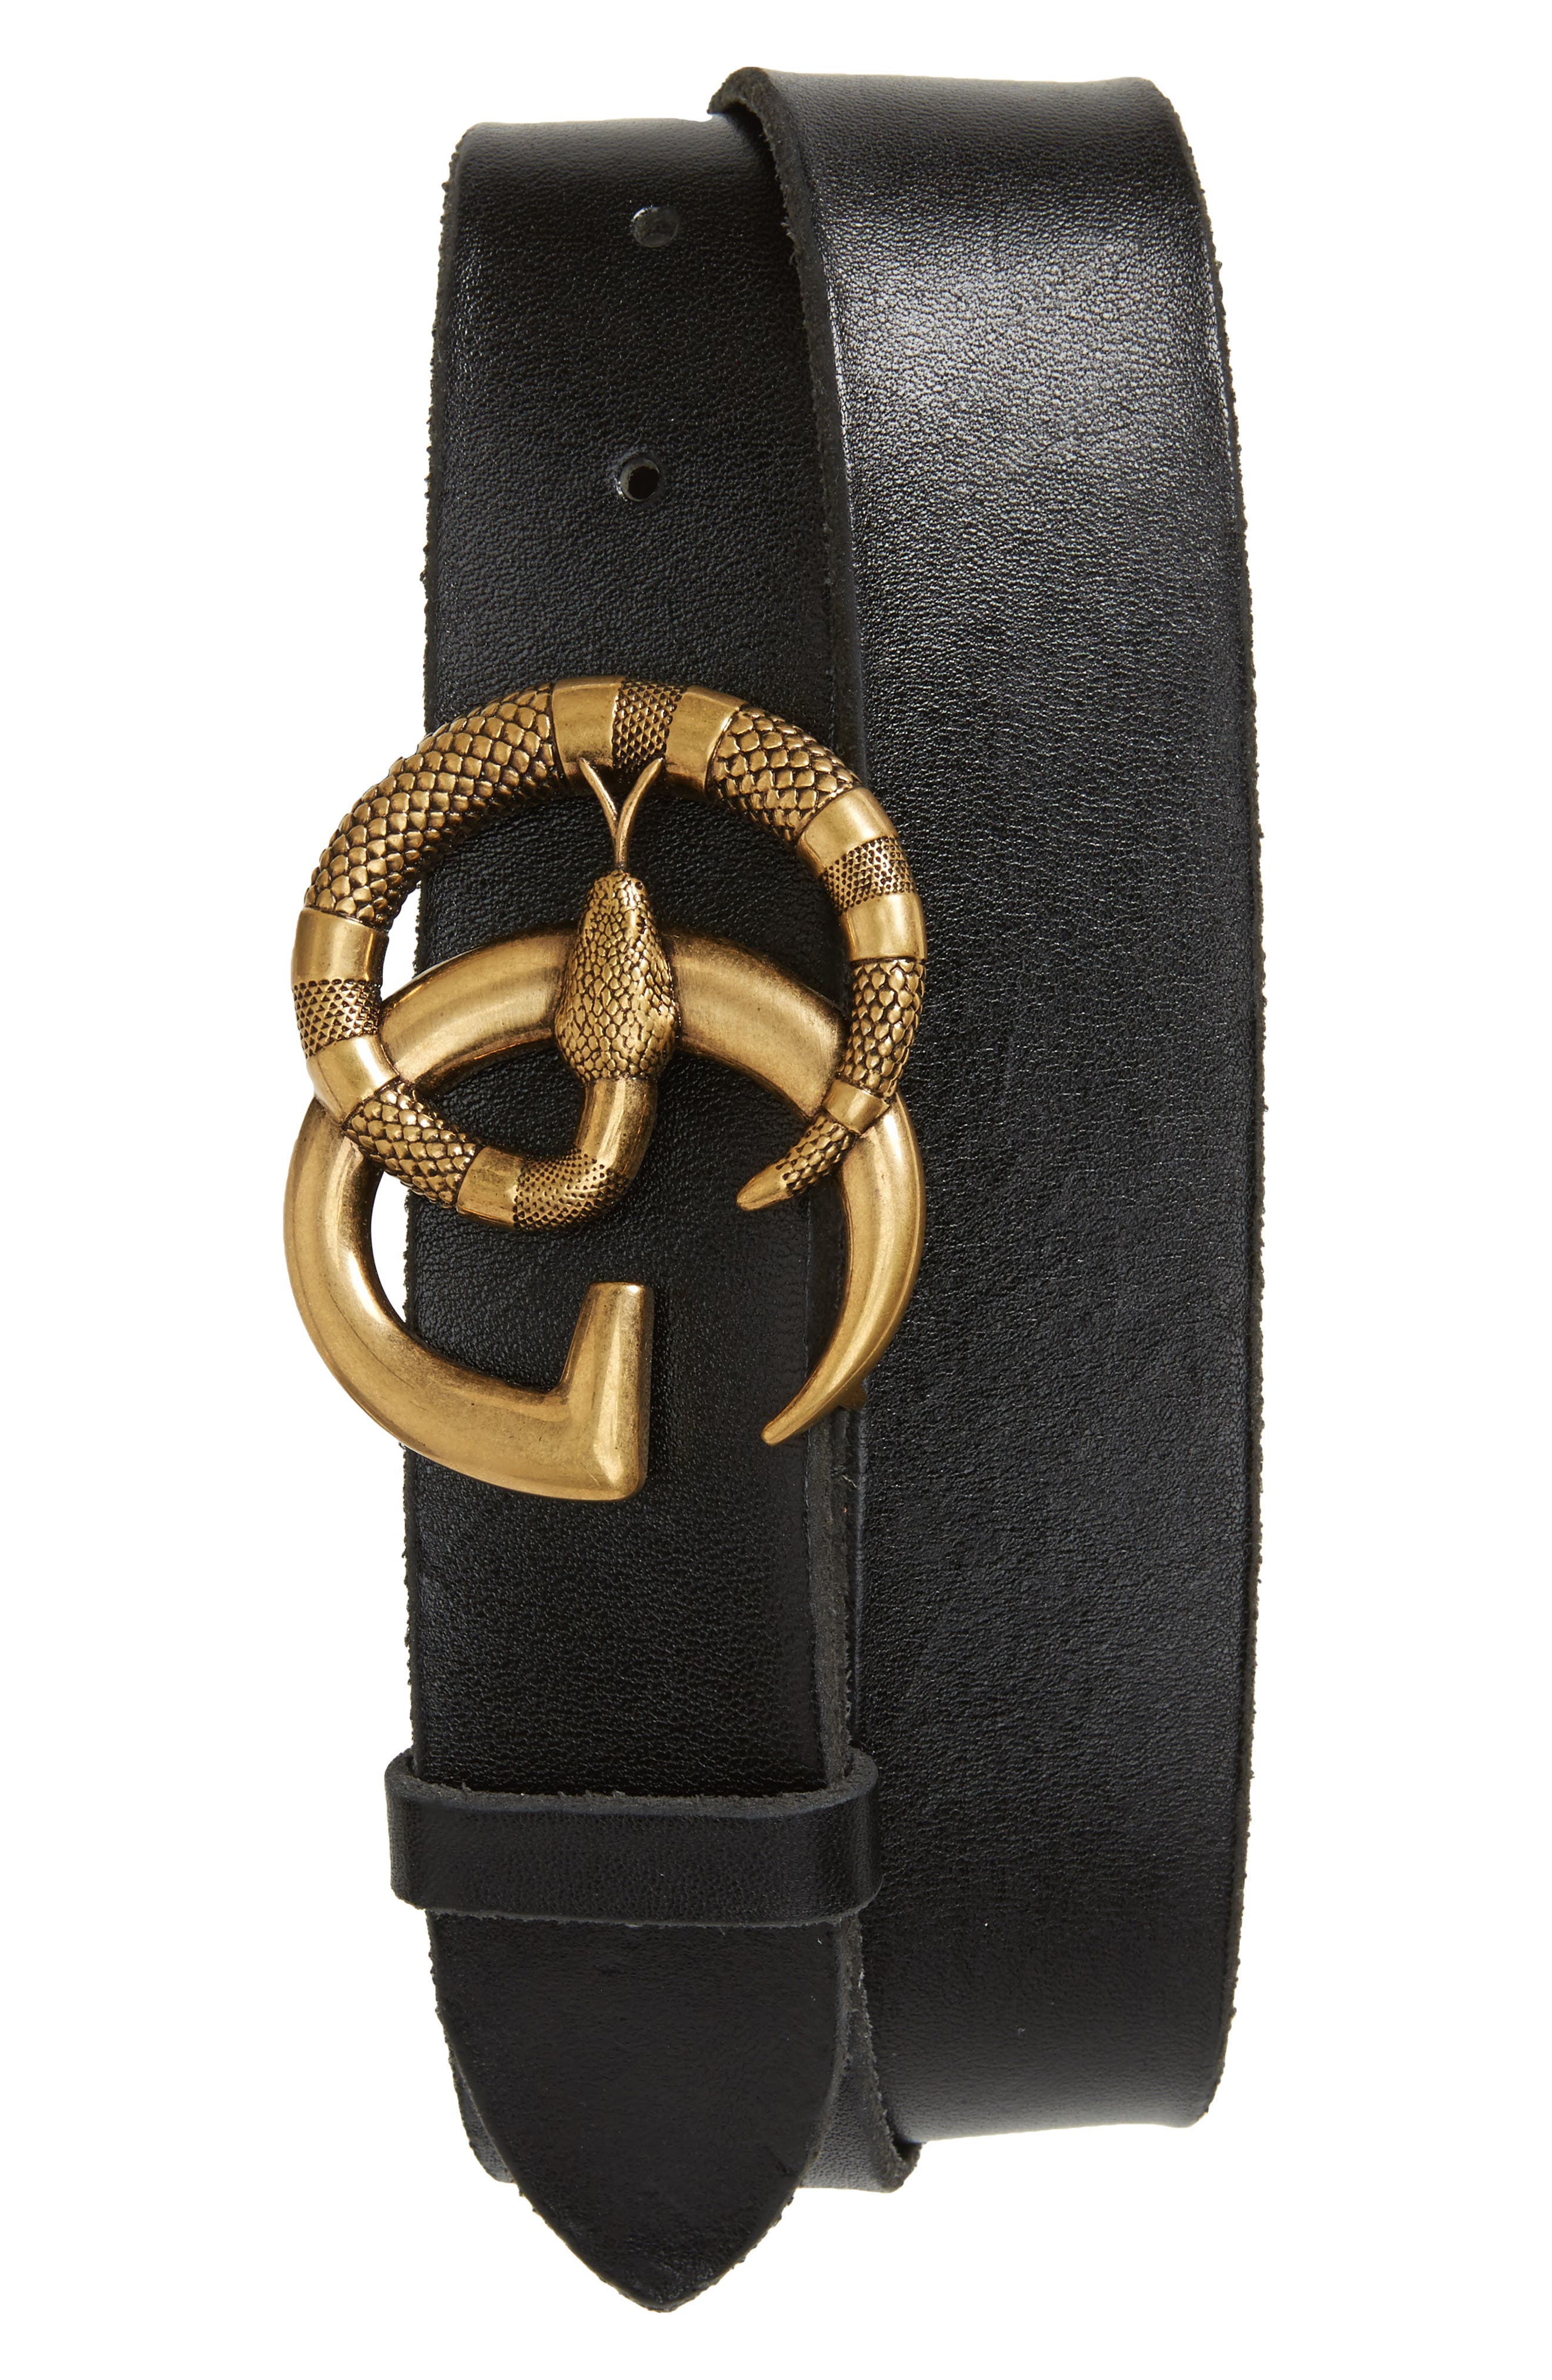 double g buckle with snake